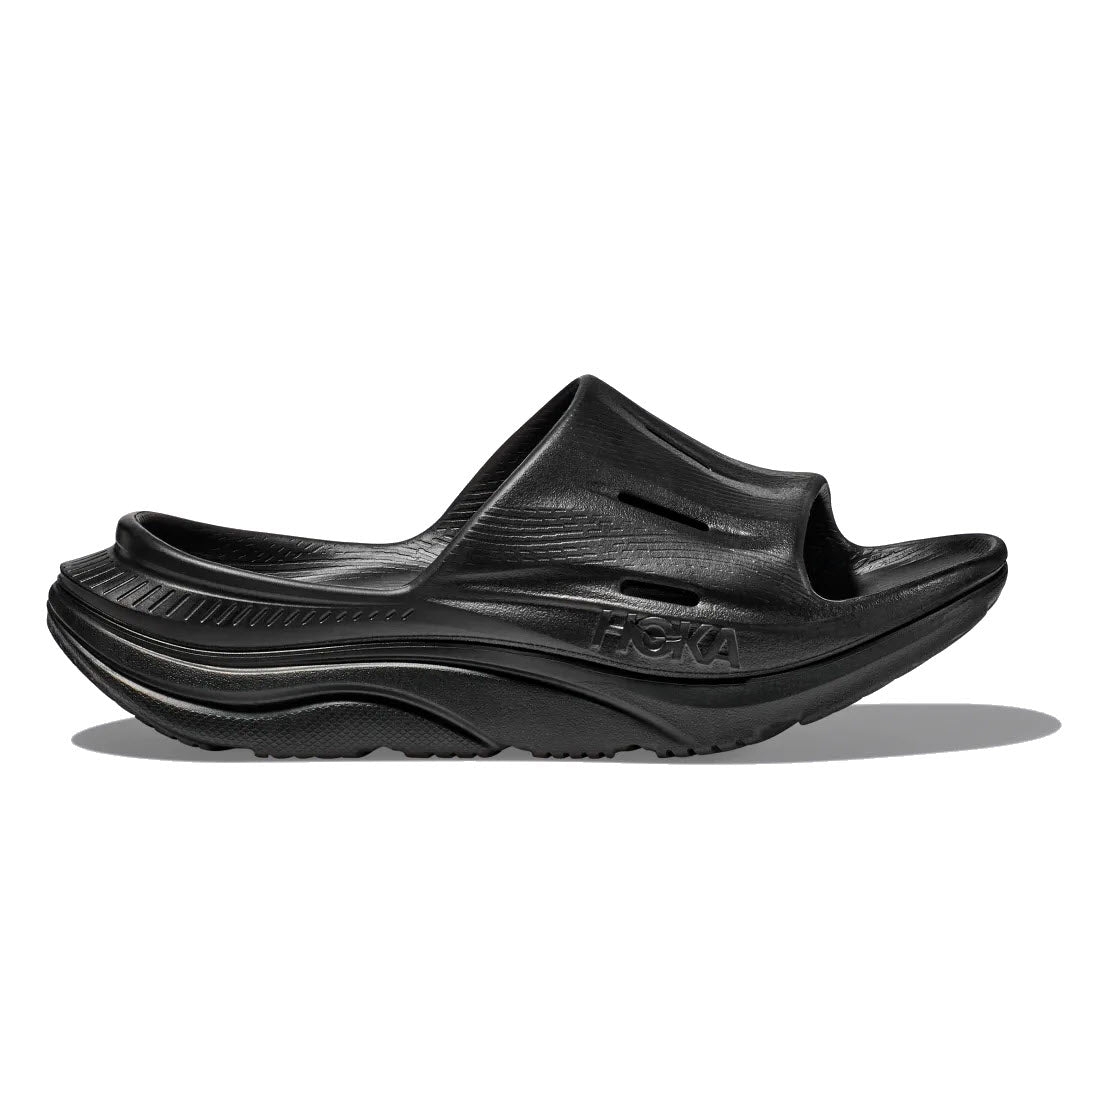 Black HOKA ORA Slide 3 slip-on recovery sandal with a sugarcane footbed against a white background.